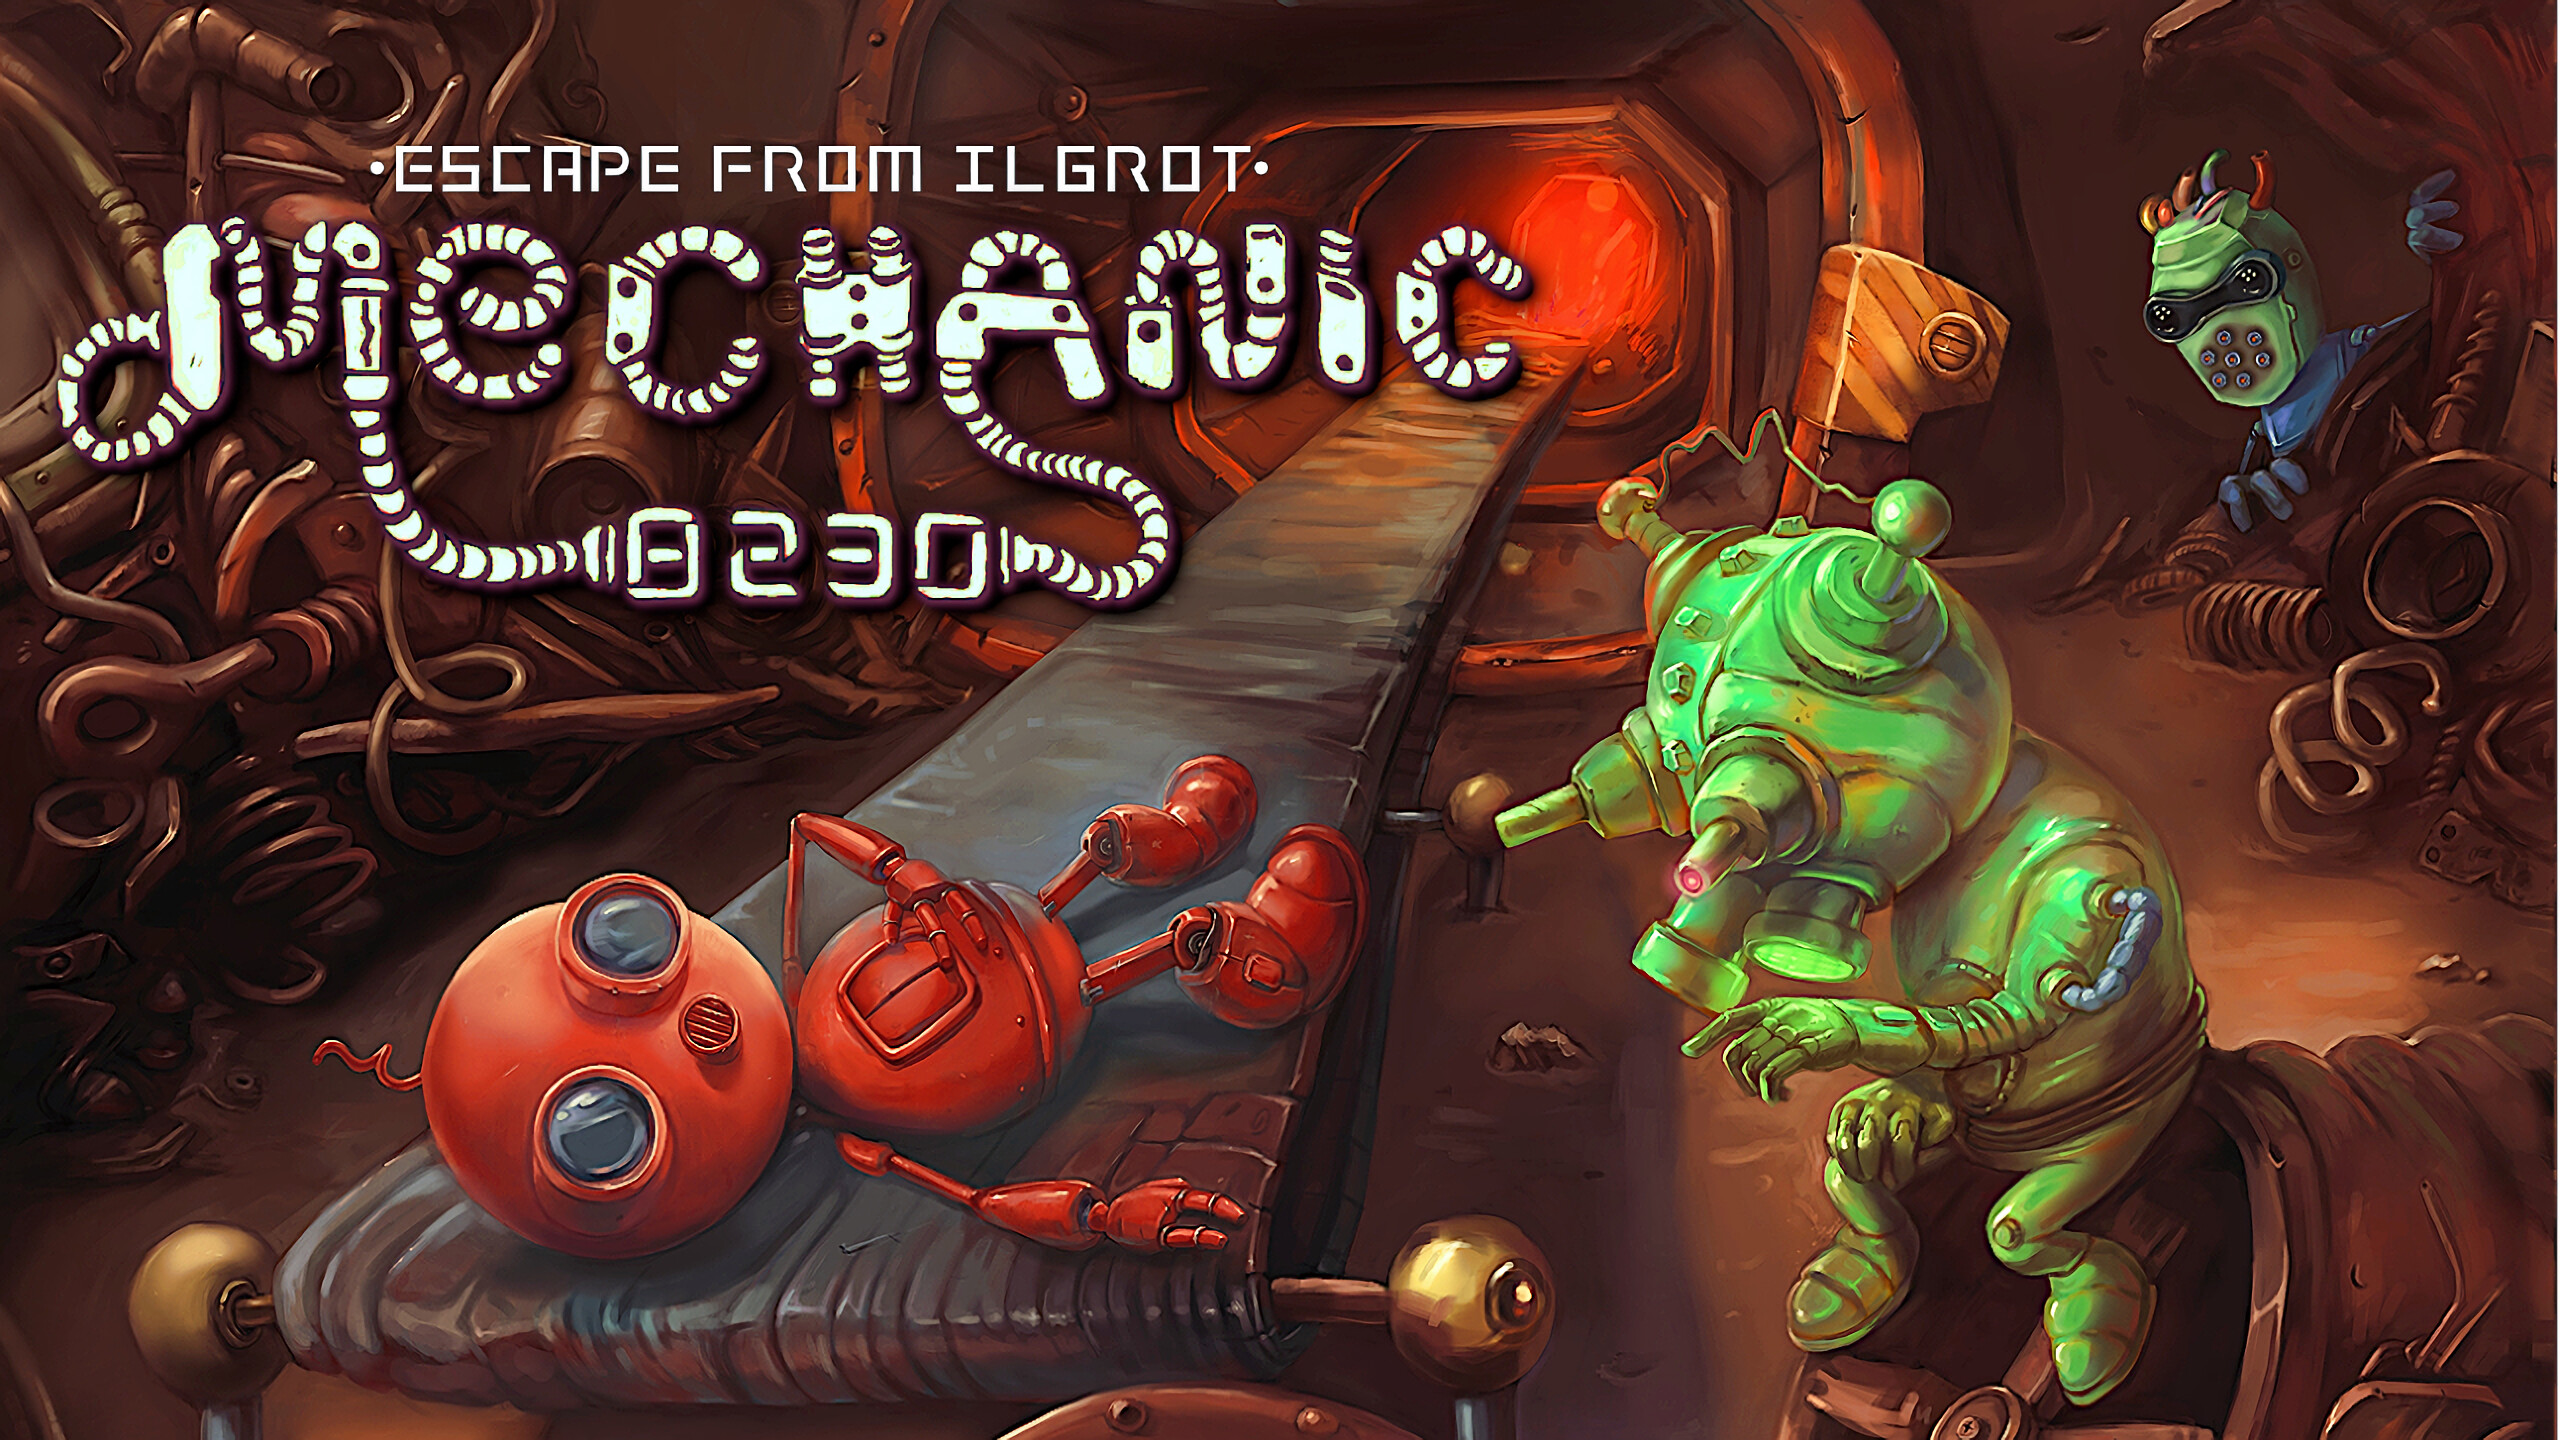 Mechanic 8230 (Game): Escape from Ilgrot, Hidden object indie game. 2560x1440 HD Wallpaper.